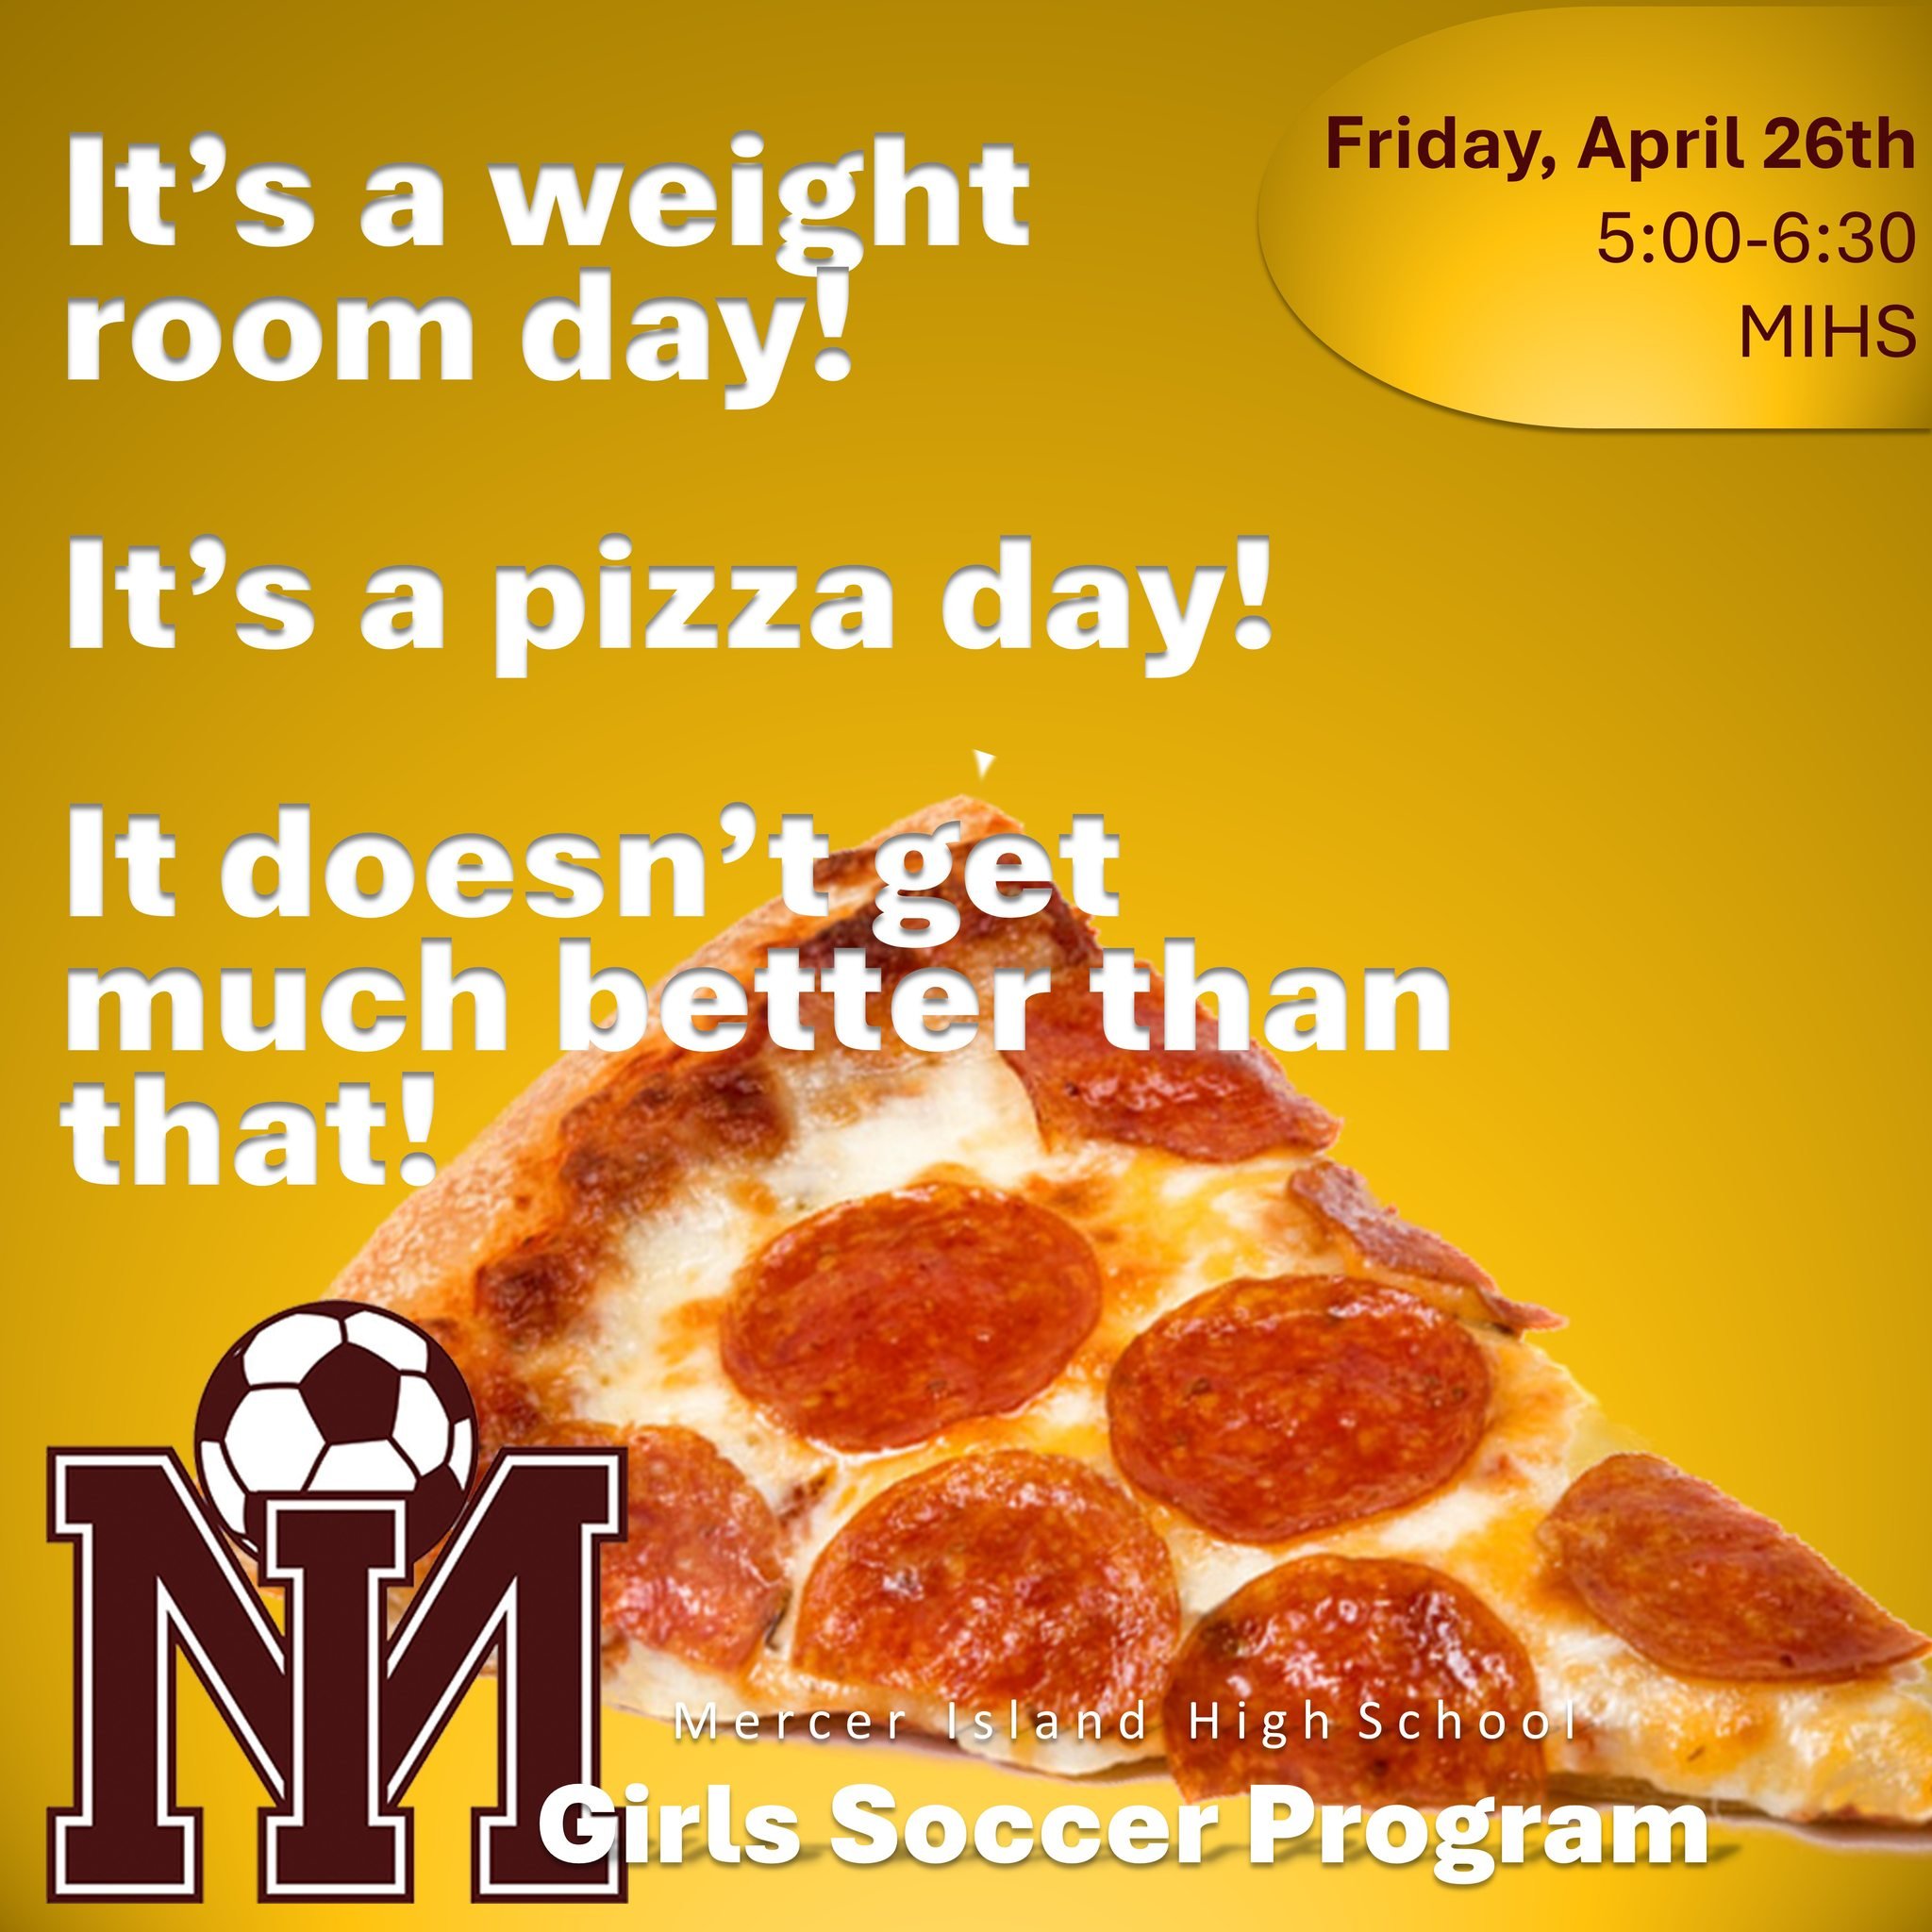 Happy Friday! It's a weight room day for MIHS Girls Soccer. After training, get ready to head to Pagliacci's for pizza and social time. See you there. #LetsGoMISD